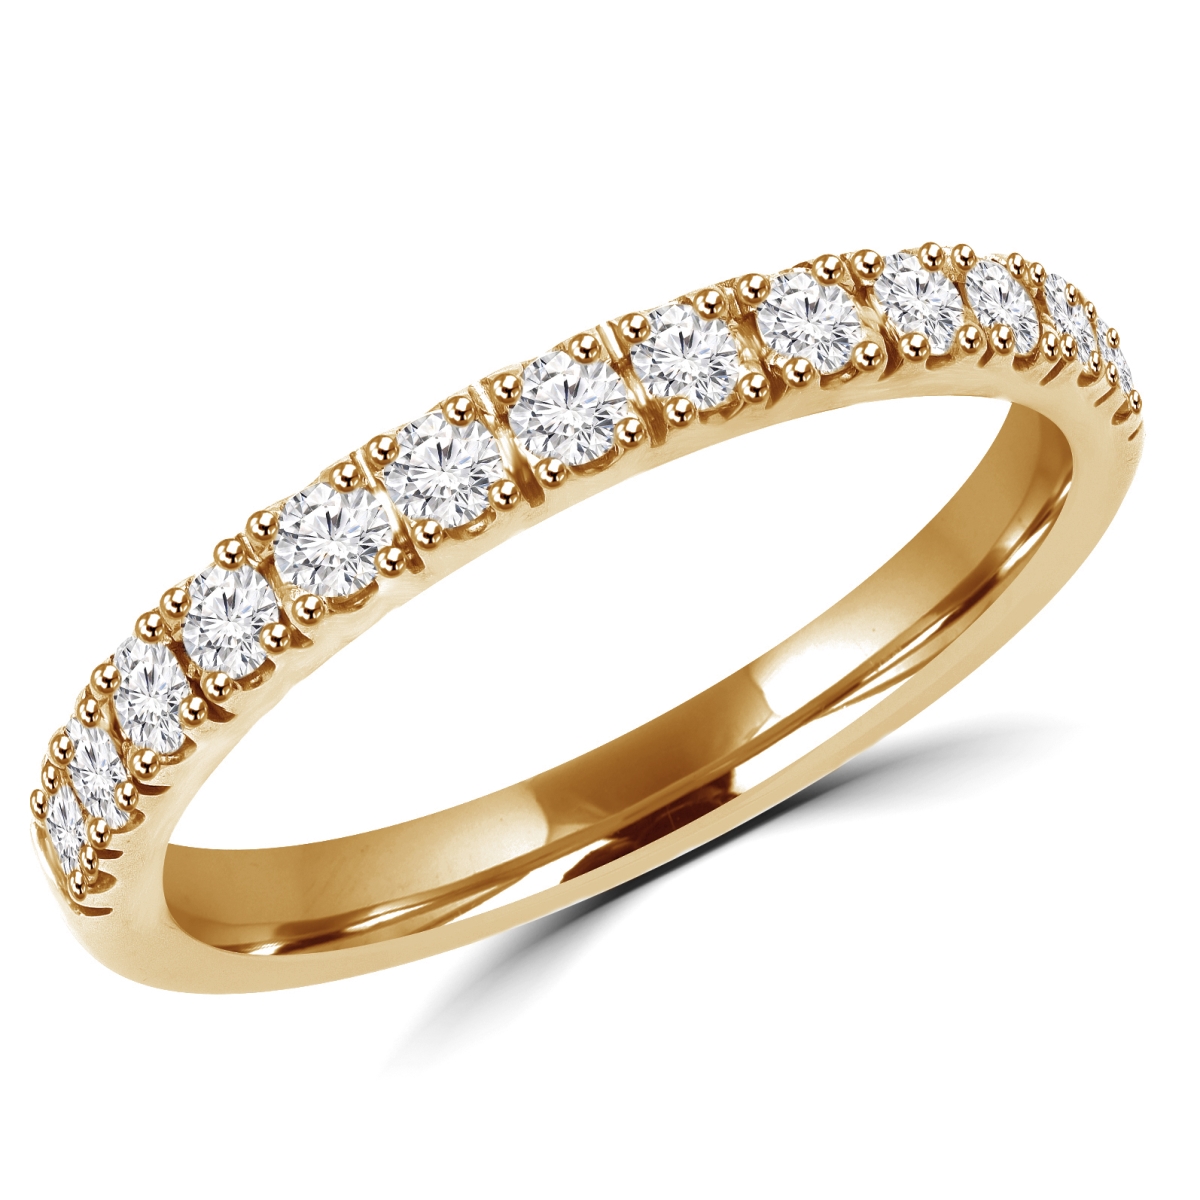 Picture of Majesty Diamonds MD180187-3.25 0.3 CTW Round Diamond Semi-Eternity Wedding Band Ring in 14K Yellow Gold - Size 3.25